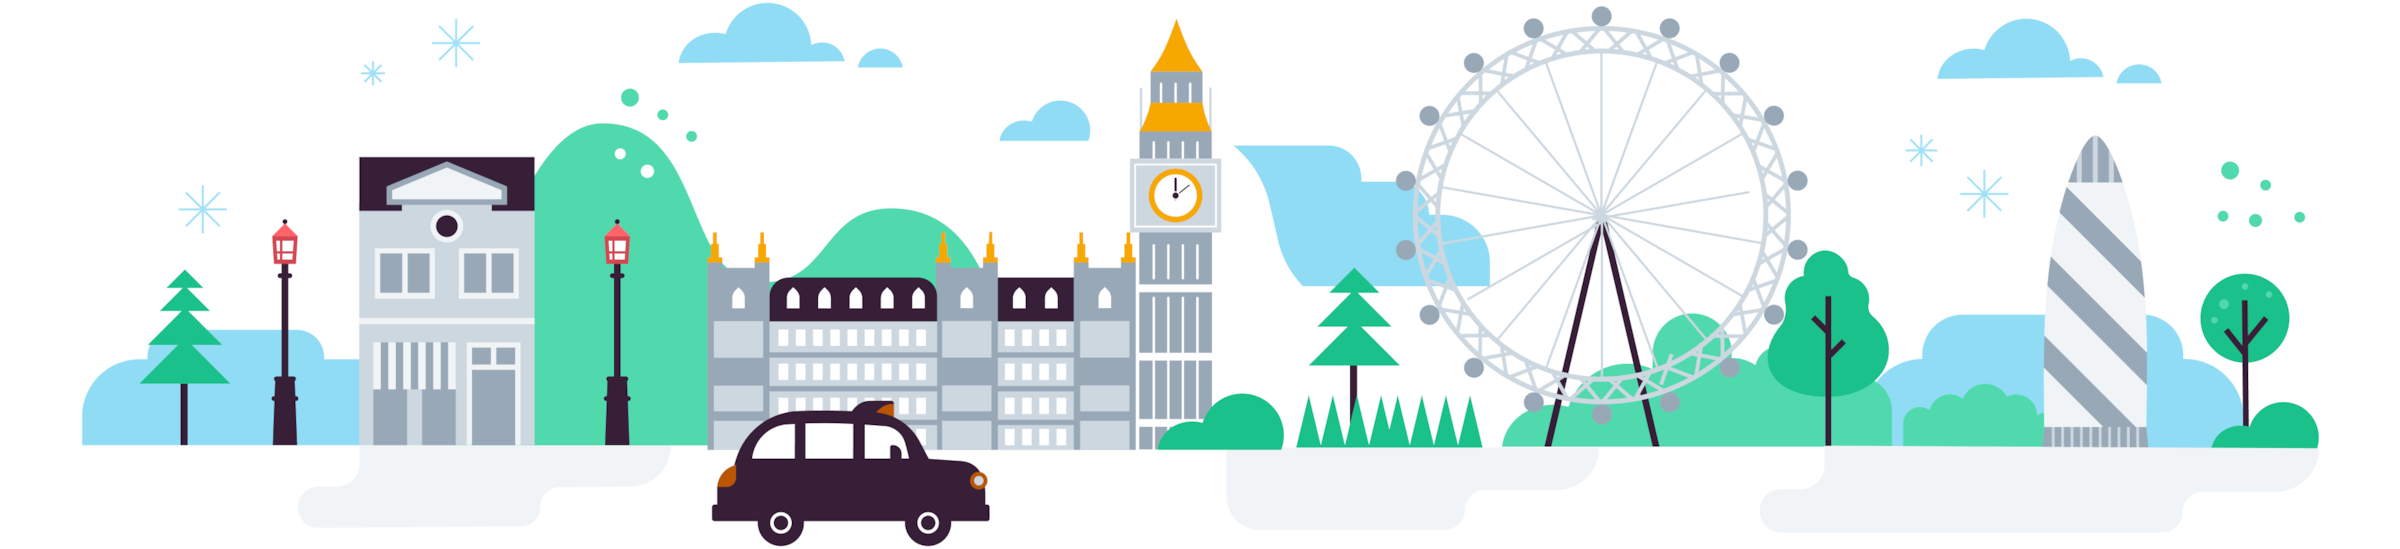 A header image for Xero’s London office, in the UK, shows some of the city’s best-known landmarks and attractions.